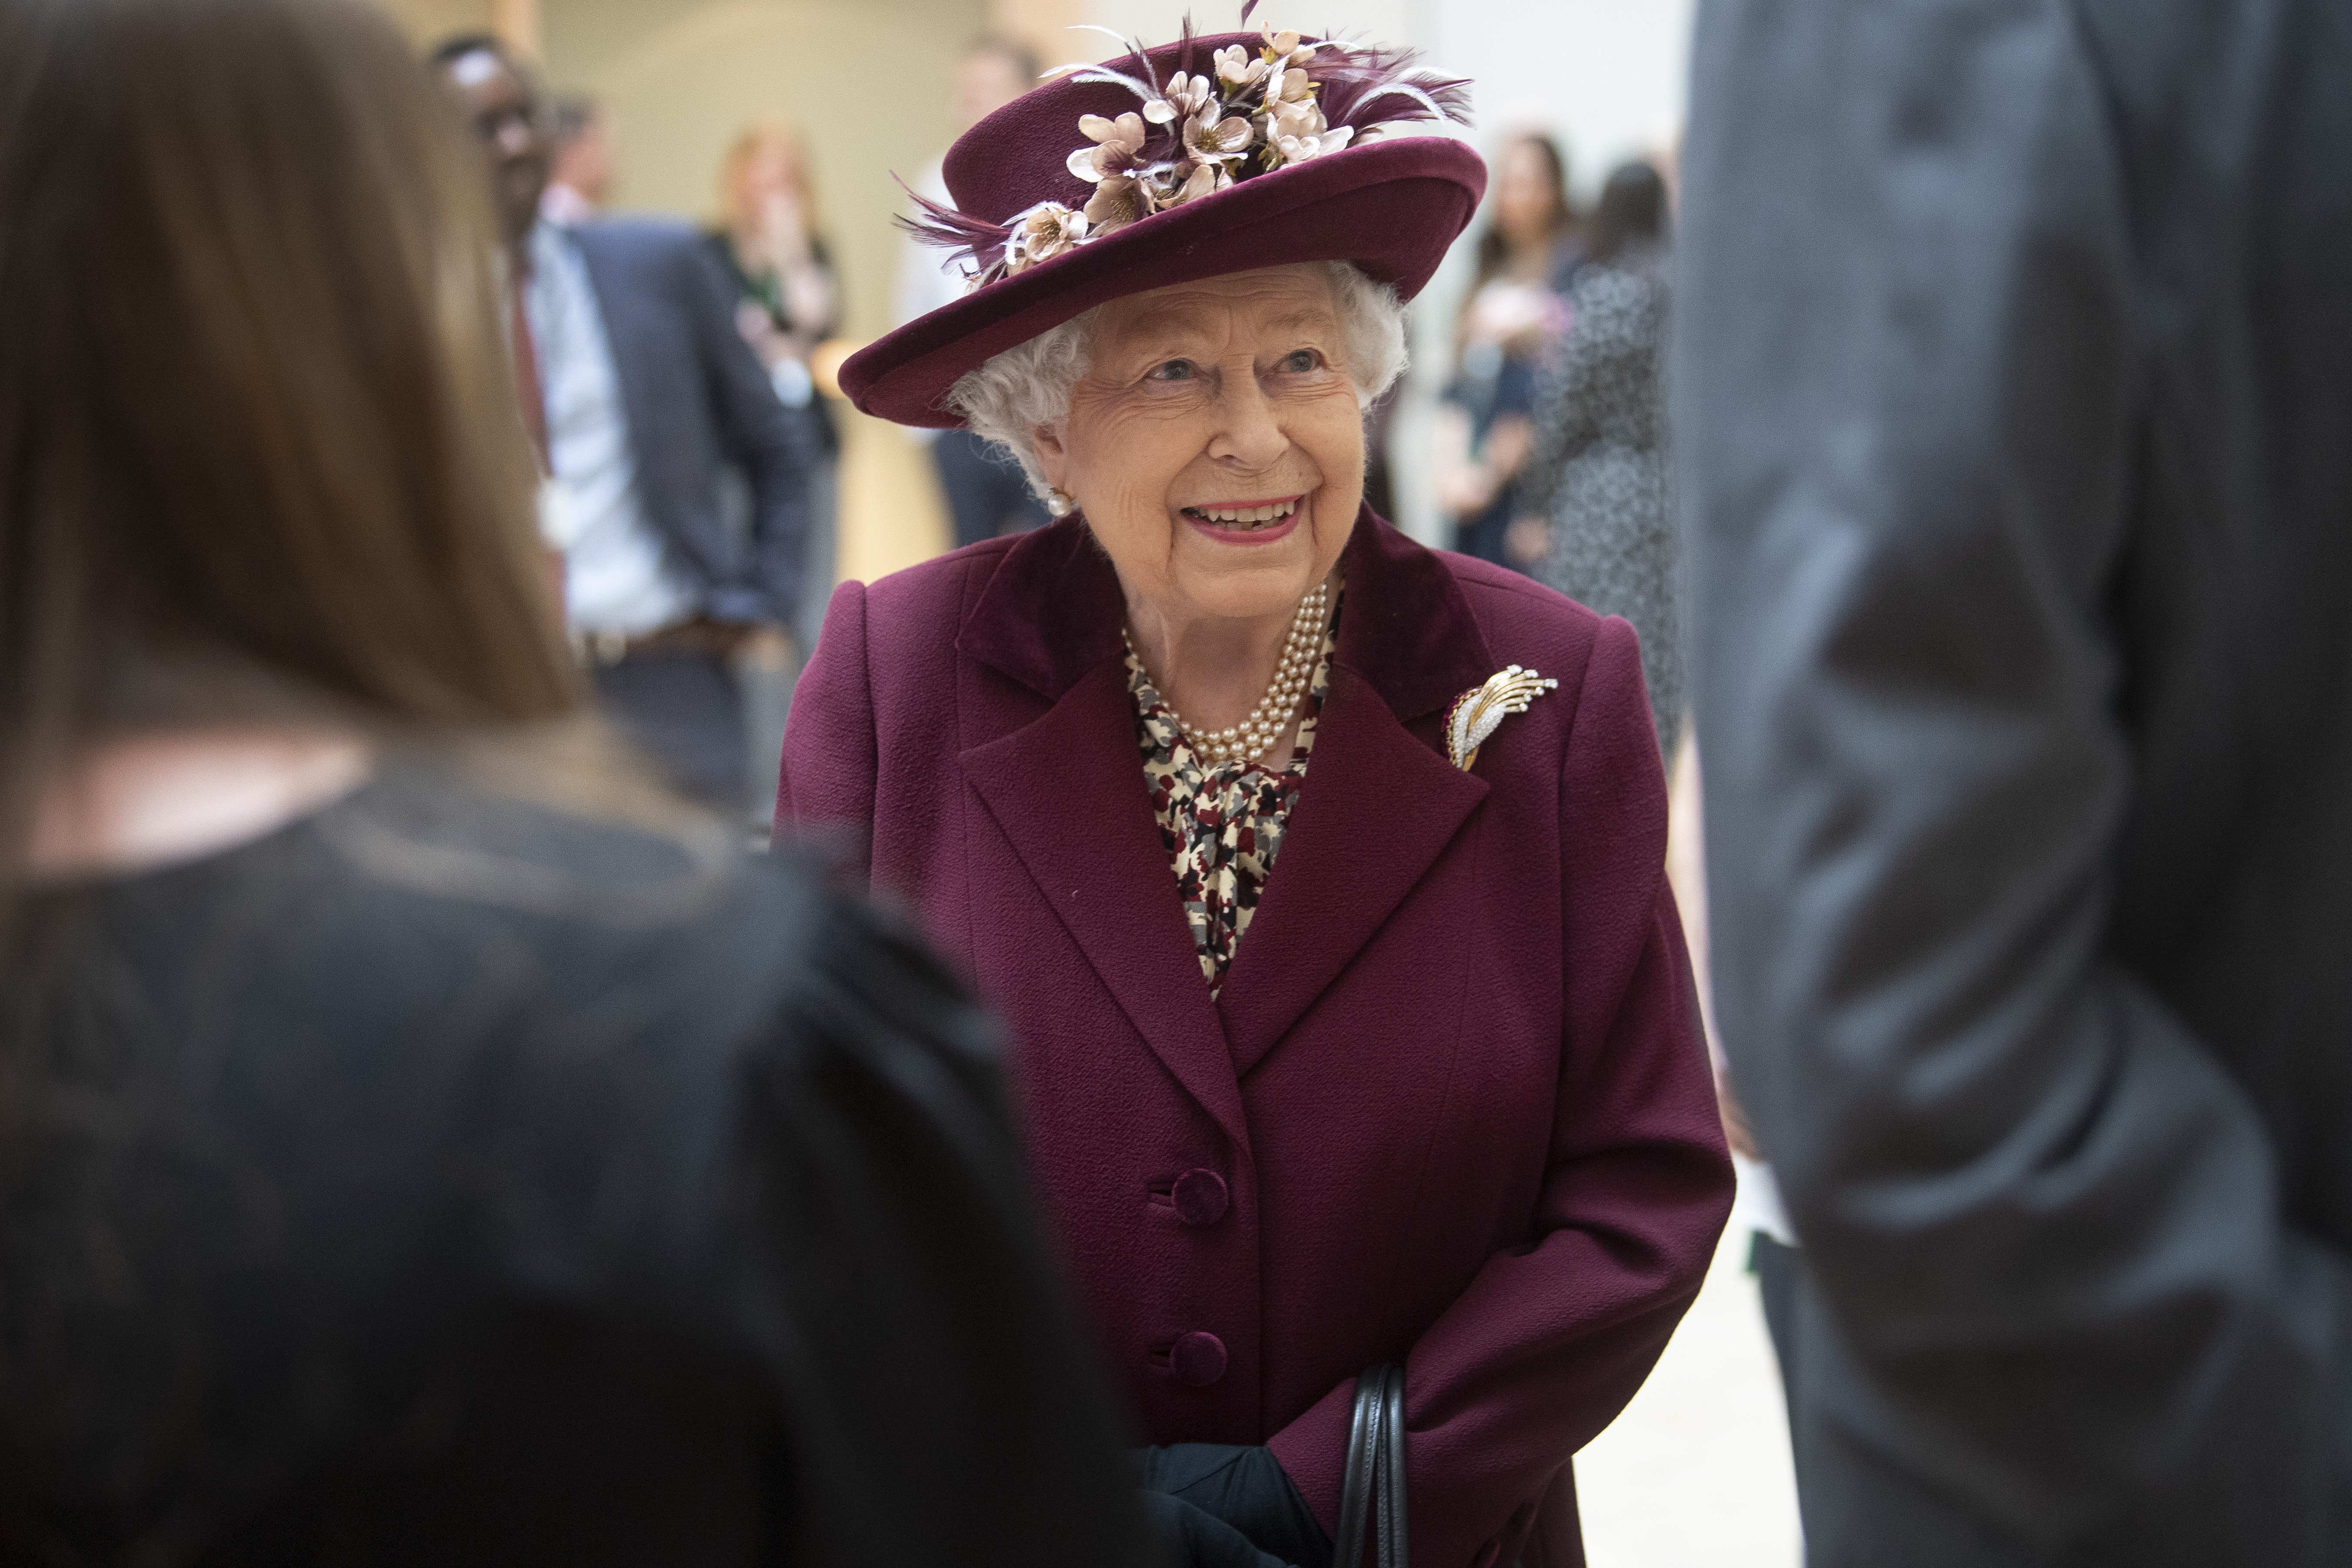 Queen Elizabeth II talks with MI5 officers during a visit to the headquarters of MI5 at Thames House on February 25, 2020 in London, England | Photo: GettyImages